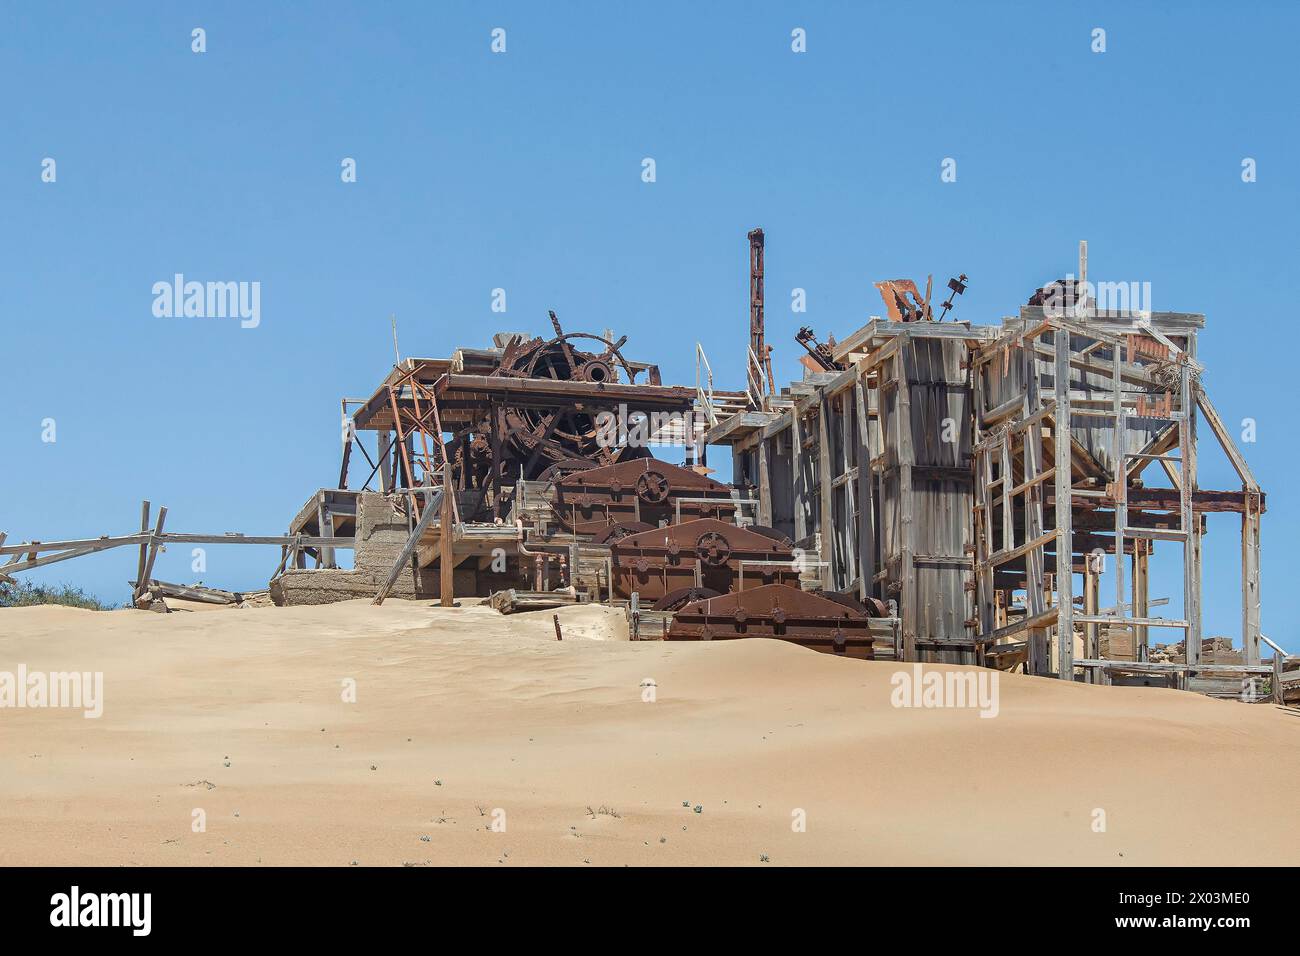 The remains of diamond extraction machinery at Bogenfels deserted mine in the Namib Desert. Stock Photo